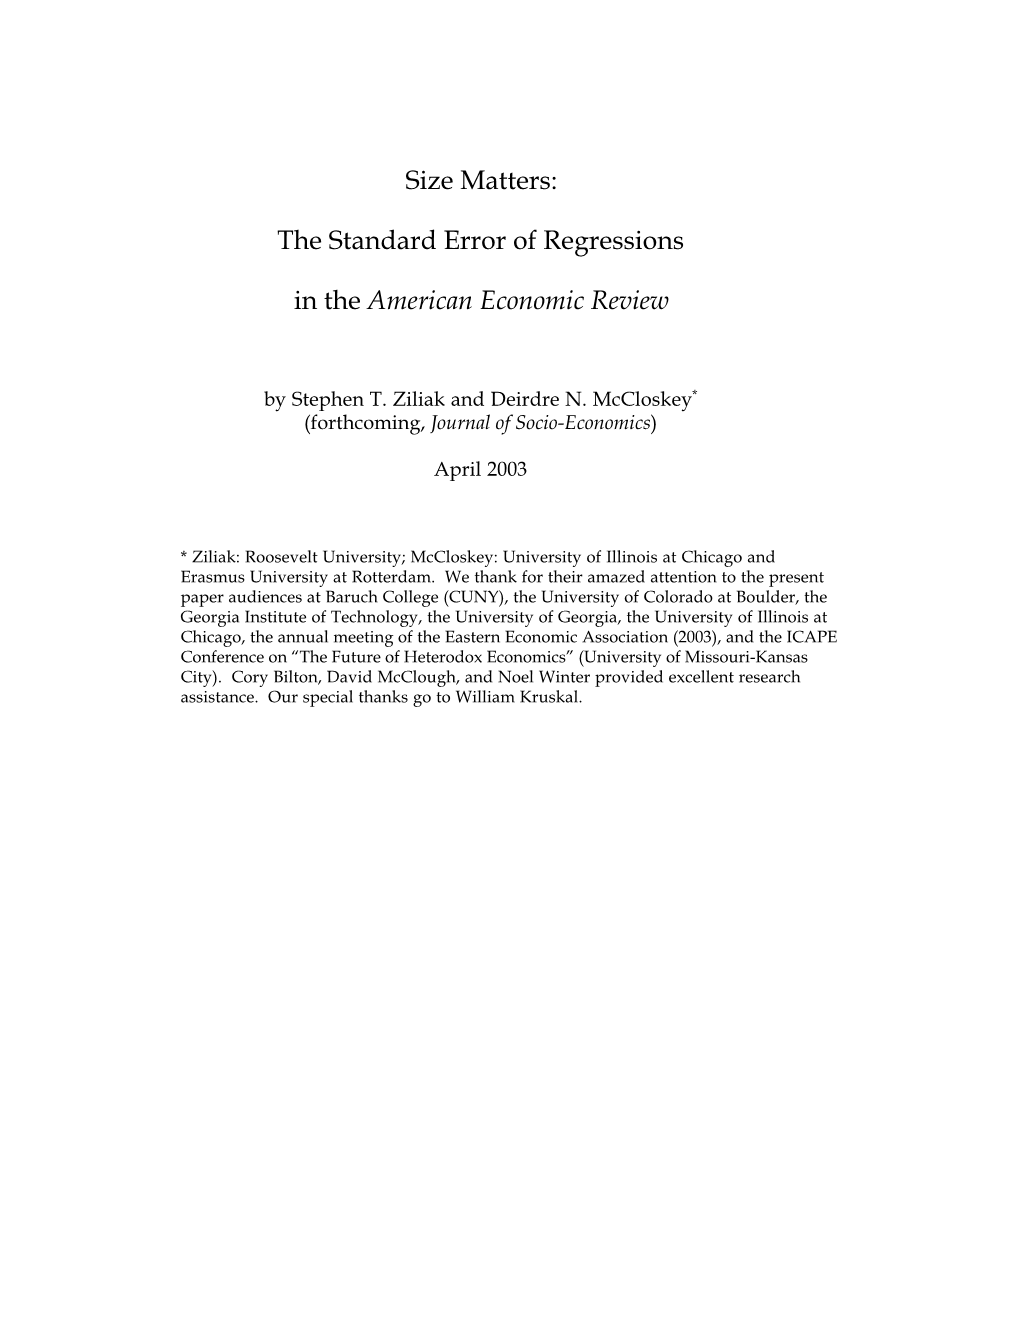 The Standard Error of Regressions in the American Economic Review